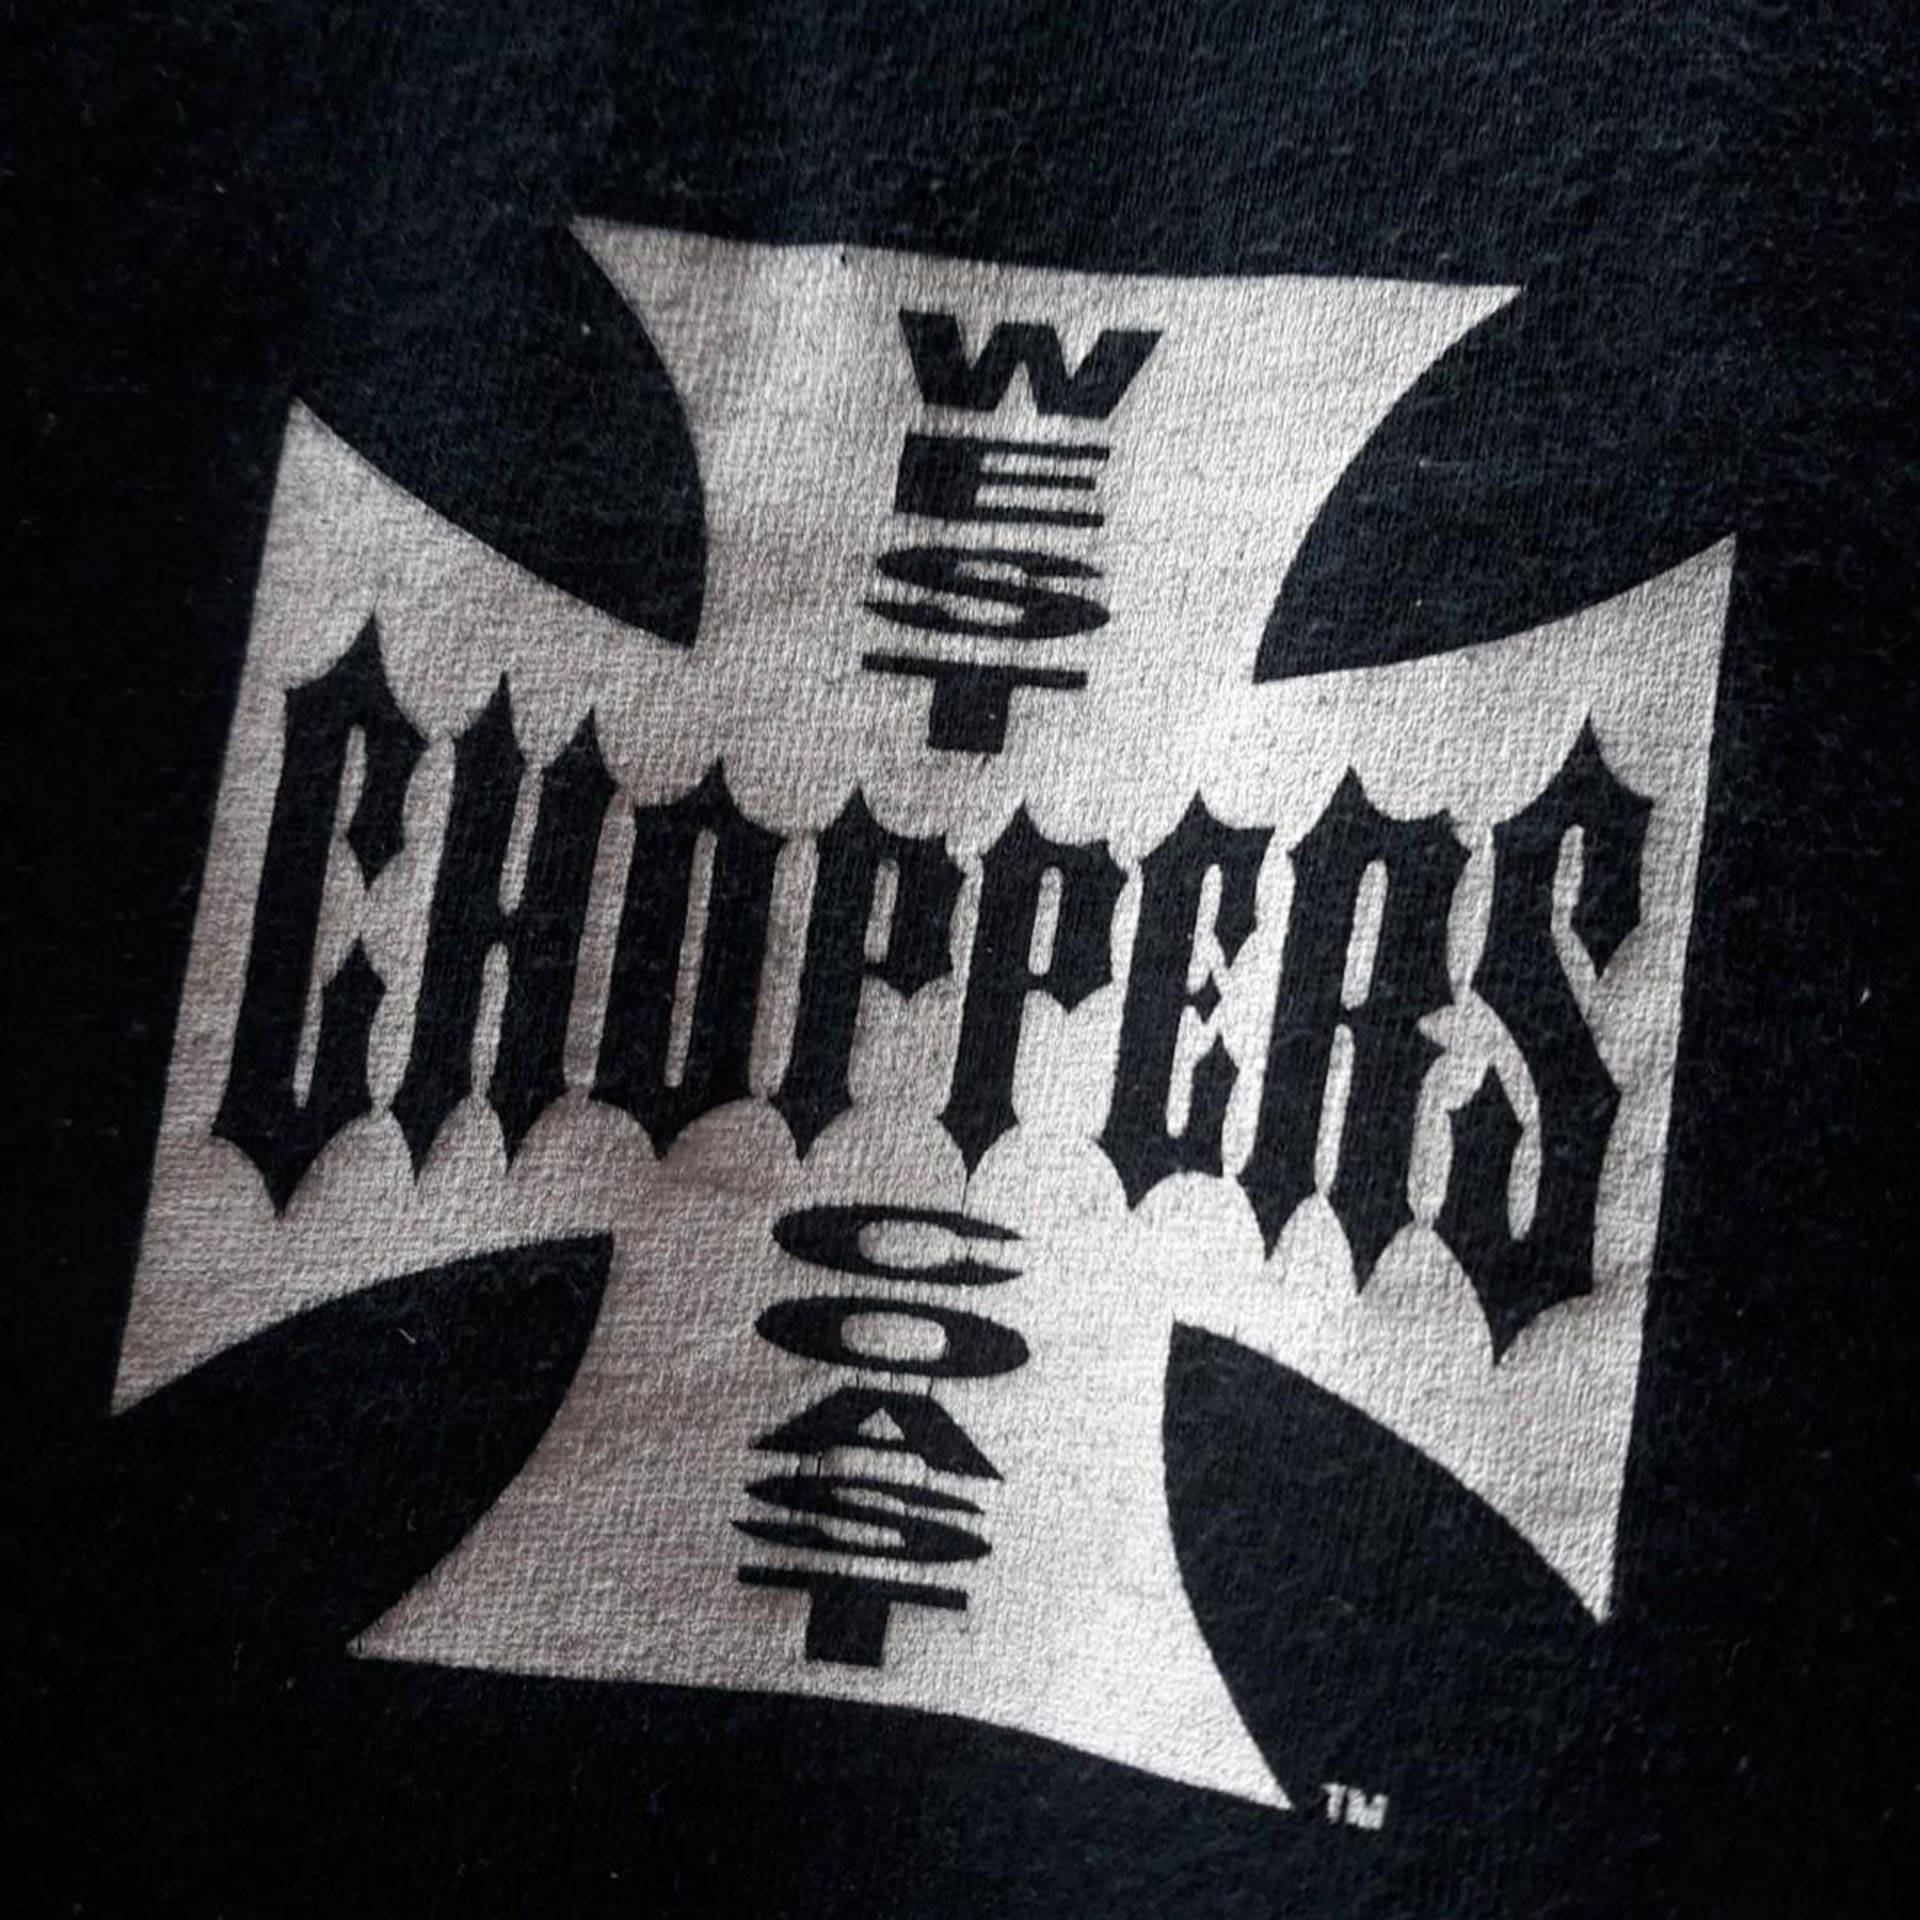 Top 999 West Coast Choppers Wallpaper Full Hd 4k Free To Use